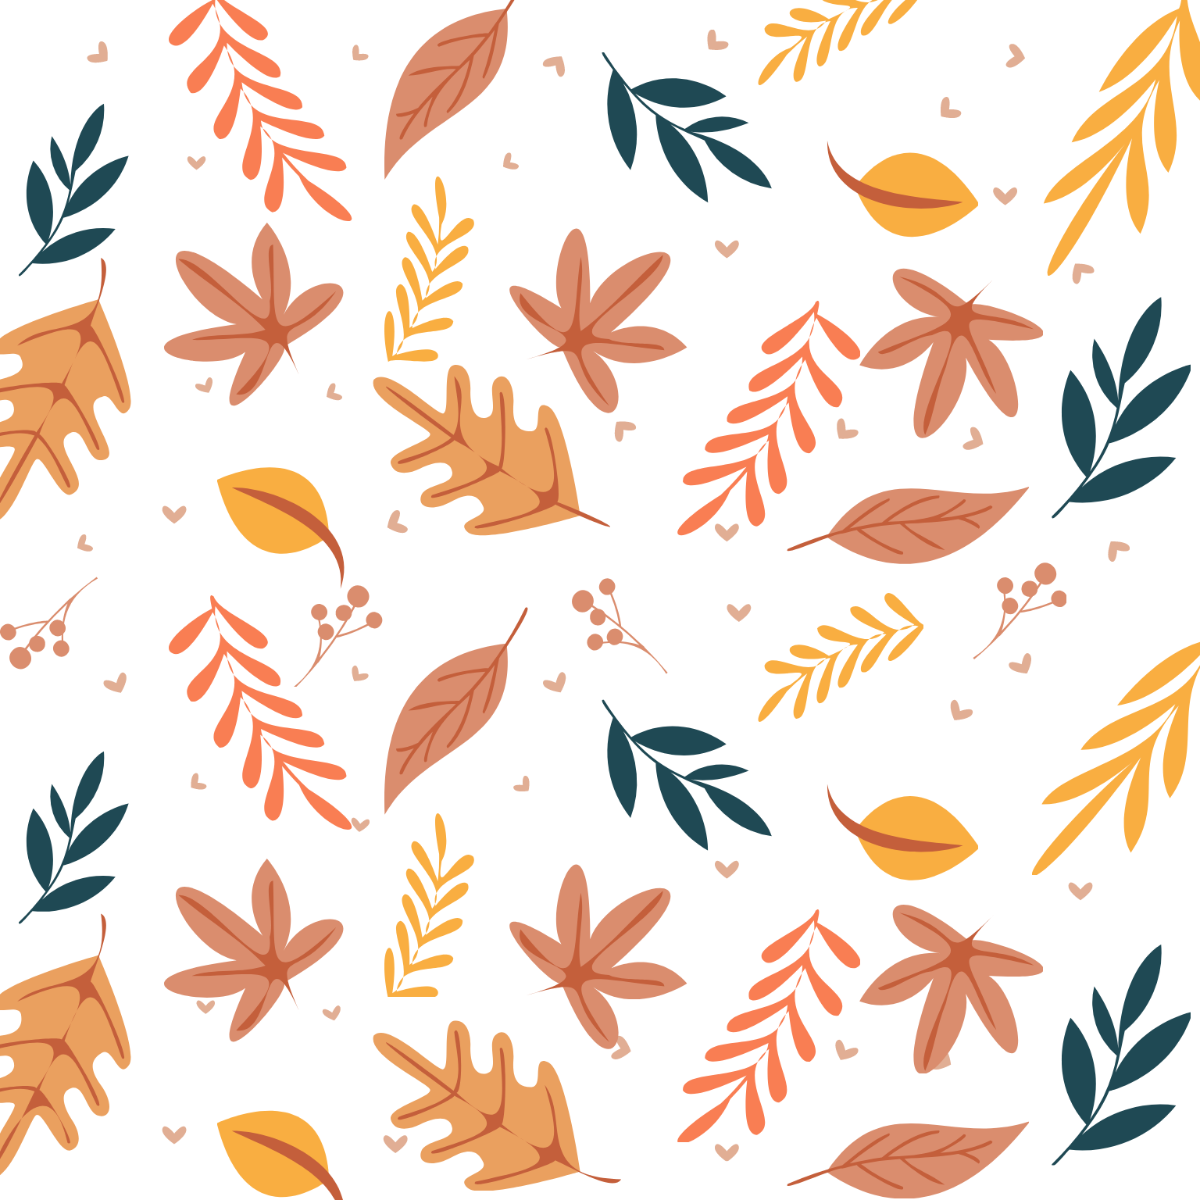 Doodle Autumn Leaves Vector Template